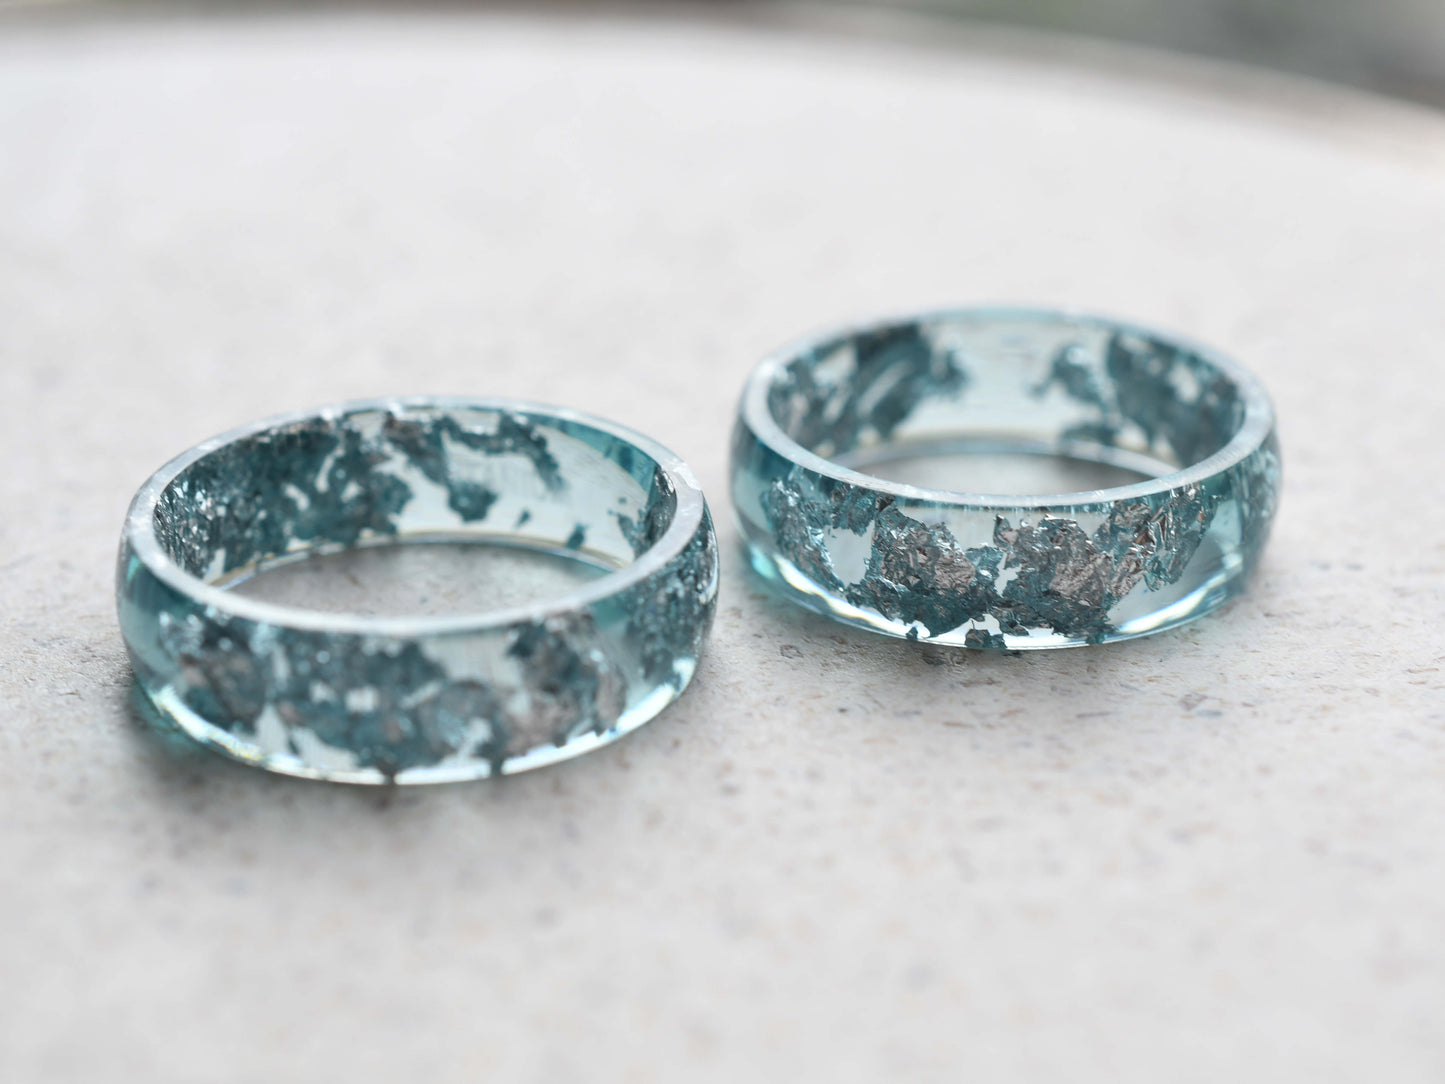 Smooth Aquamarine Resin Ring With Silver Leaf